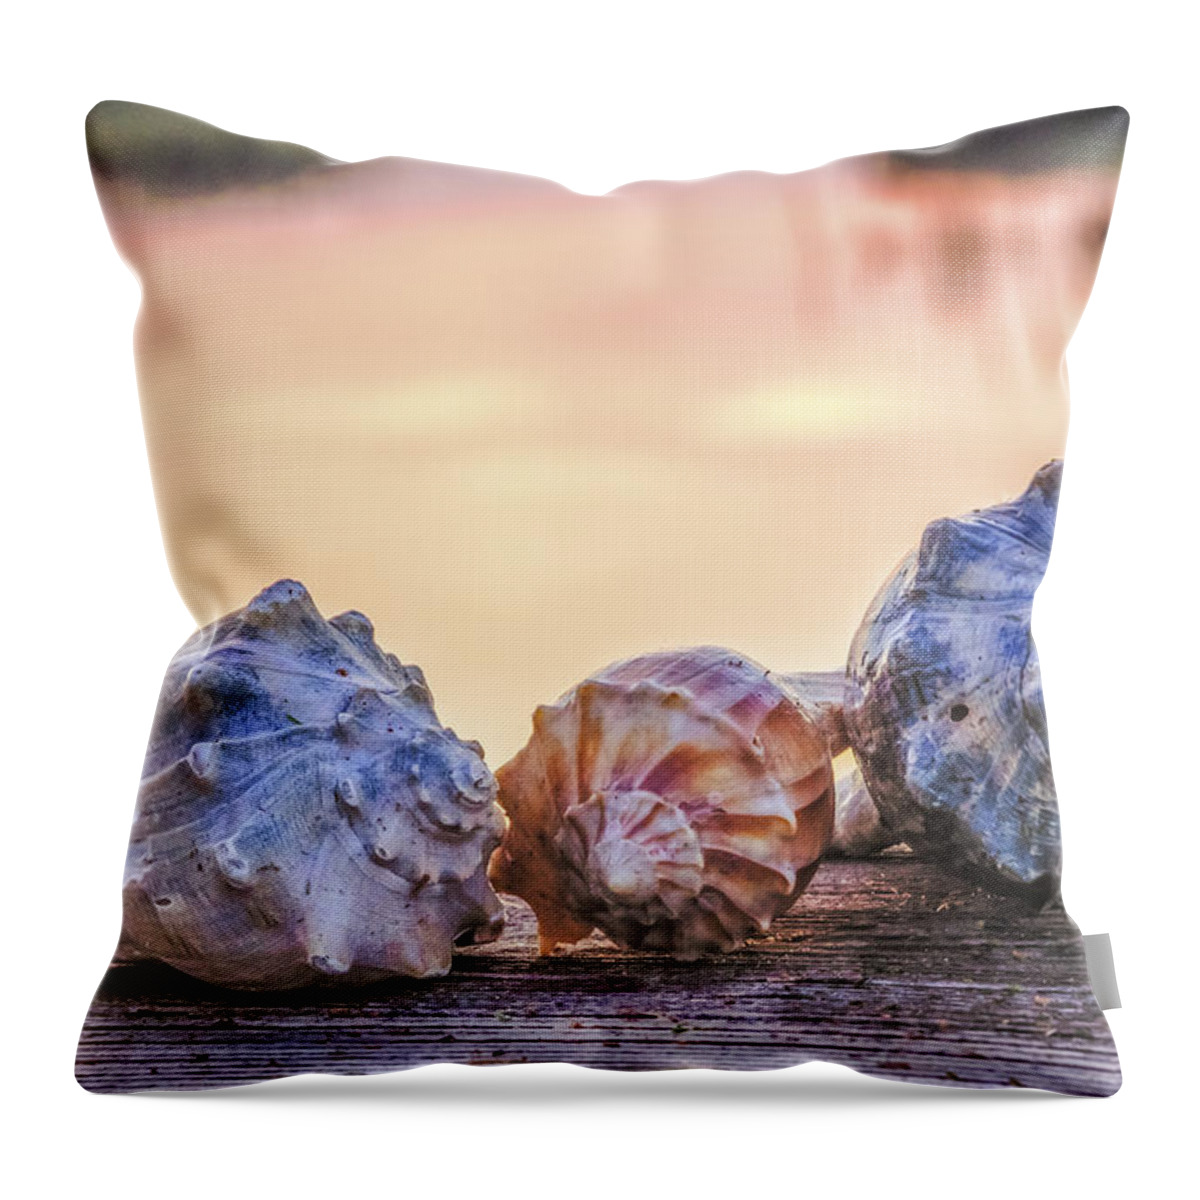 Shell Throw Pillow featuring the photograph Sea Shells Image Art by Jo Ann Tomaselli